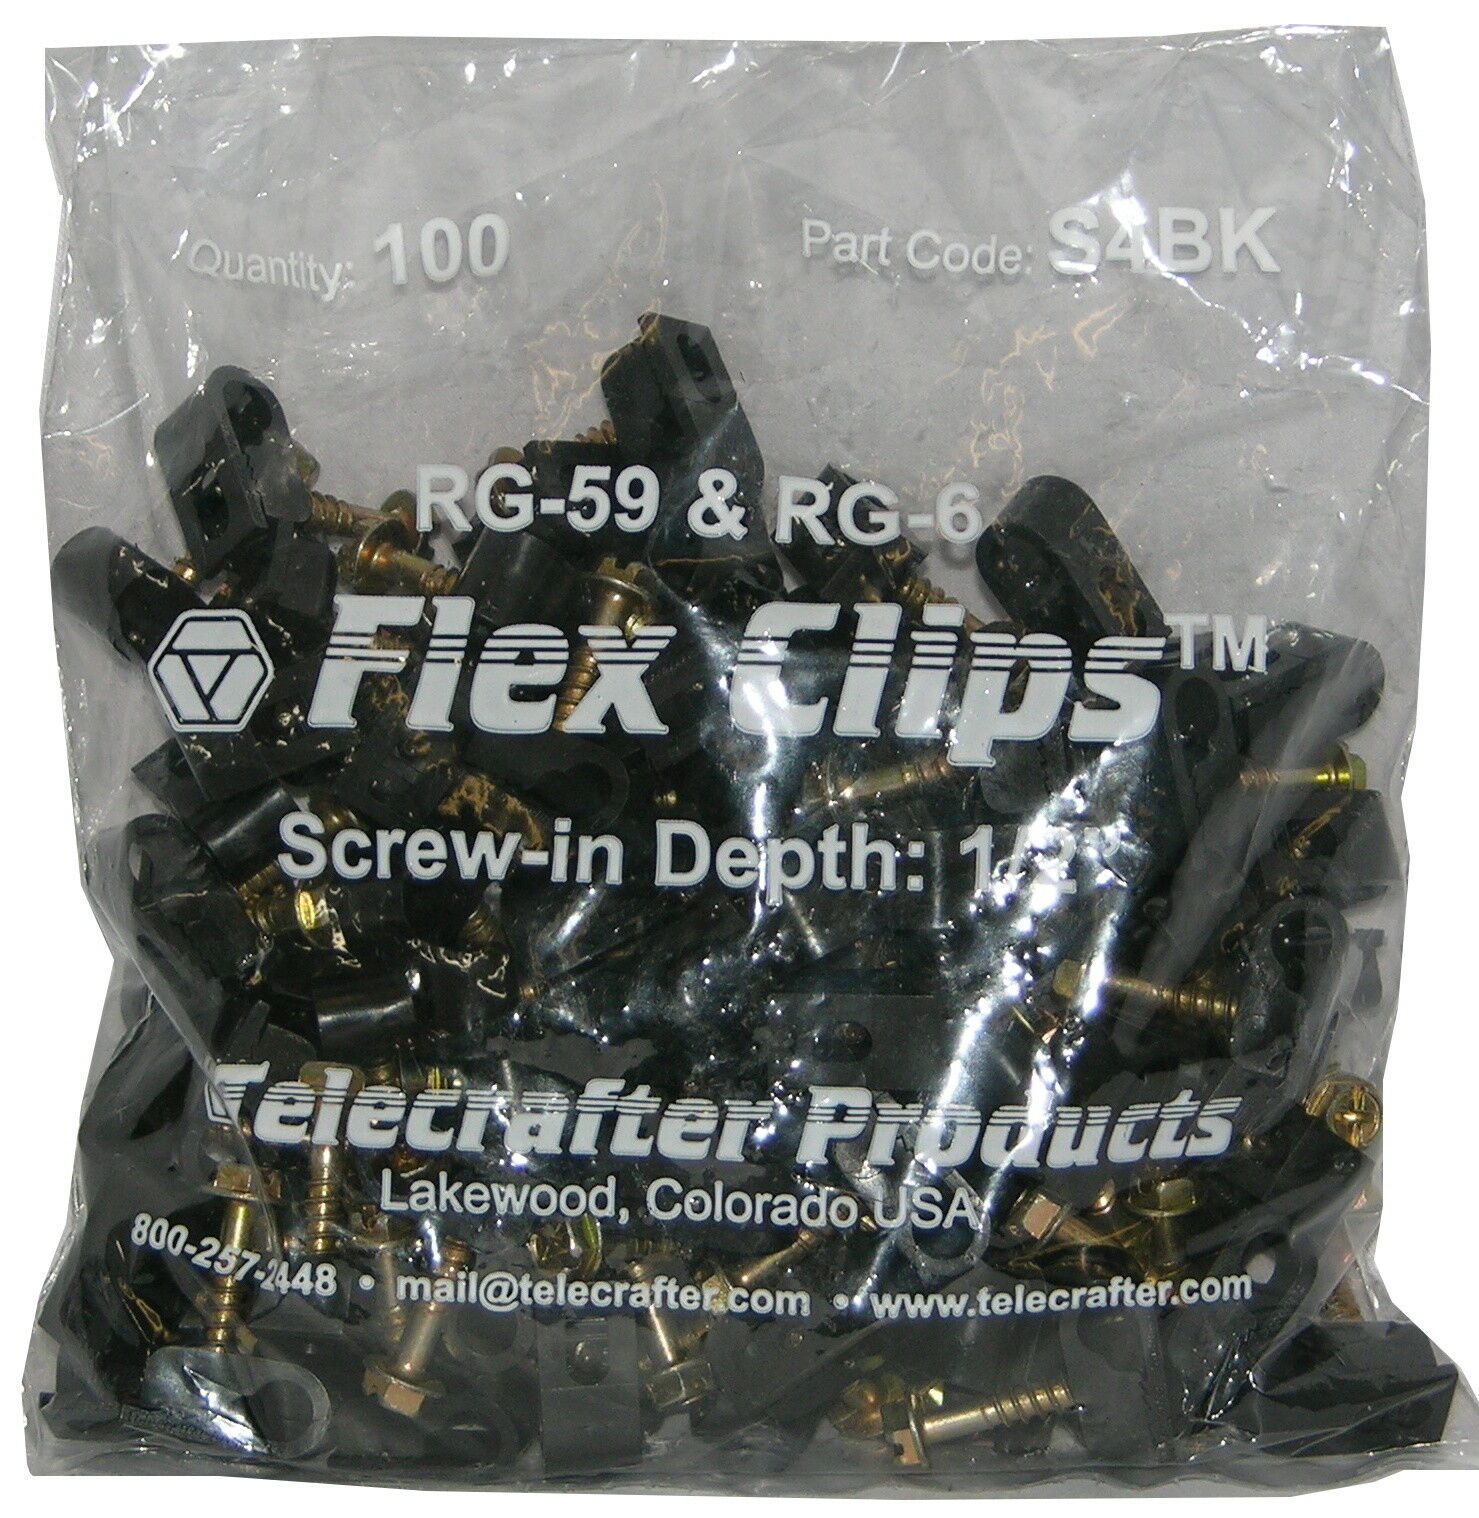 Telecrafter, Telecrafter S4BK, Flex Clips for RG-6 or RG-59 Coax Cable, 1/2" screw, 100/bag